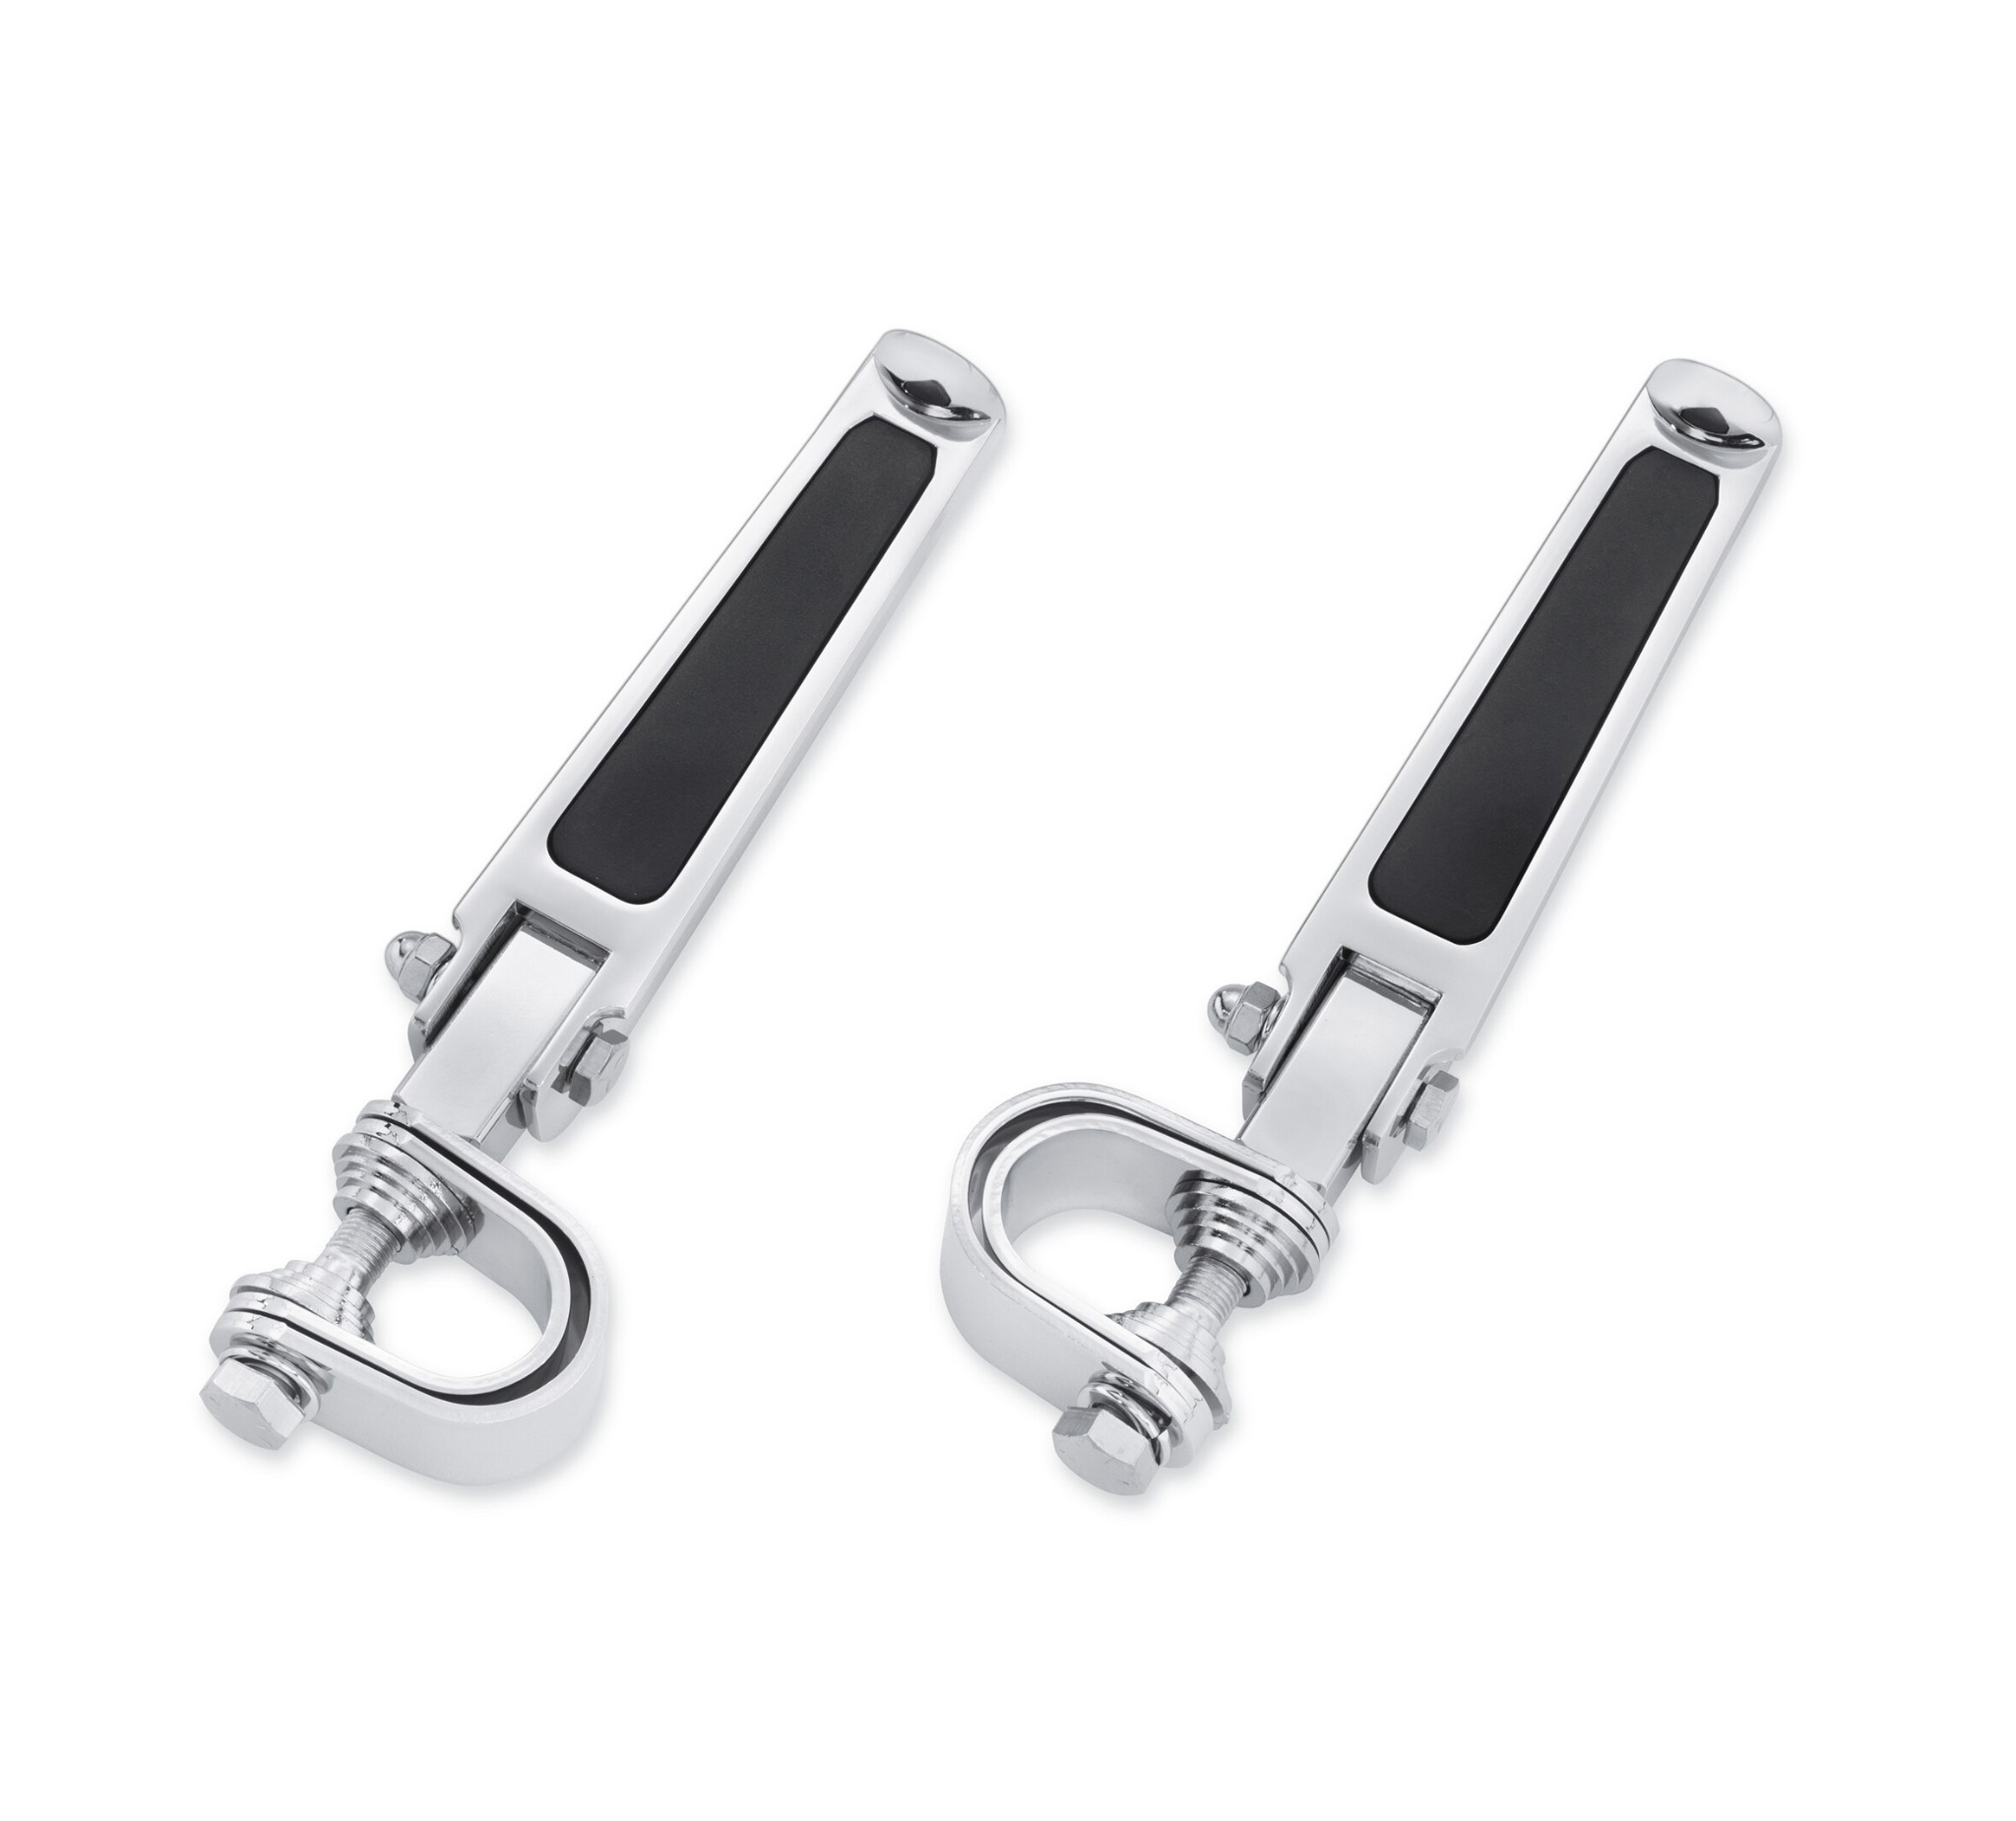 Details about  / Edge Cut Handlebar Hand Grip Foot Peg For Harley Touring Sportster Dyna Softail